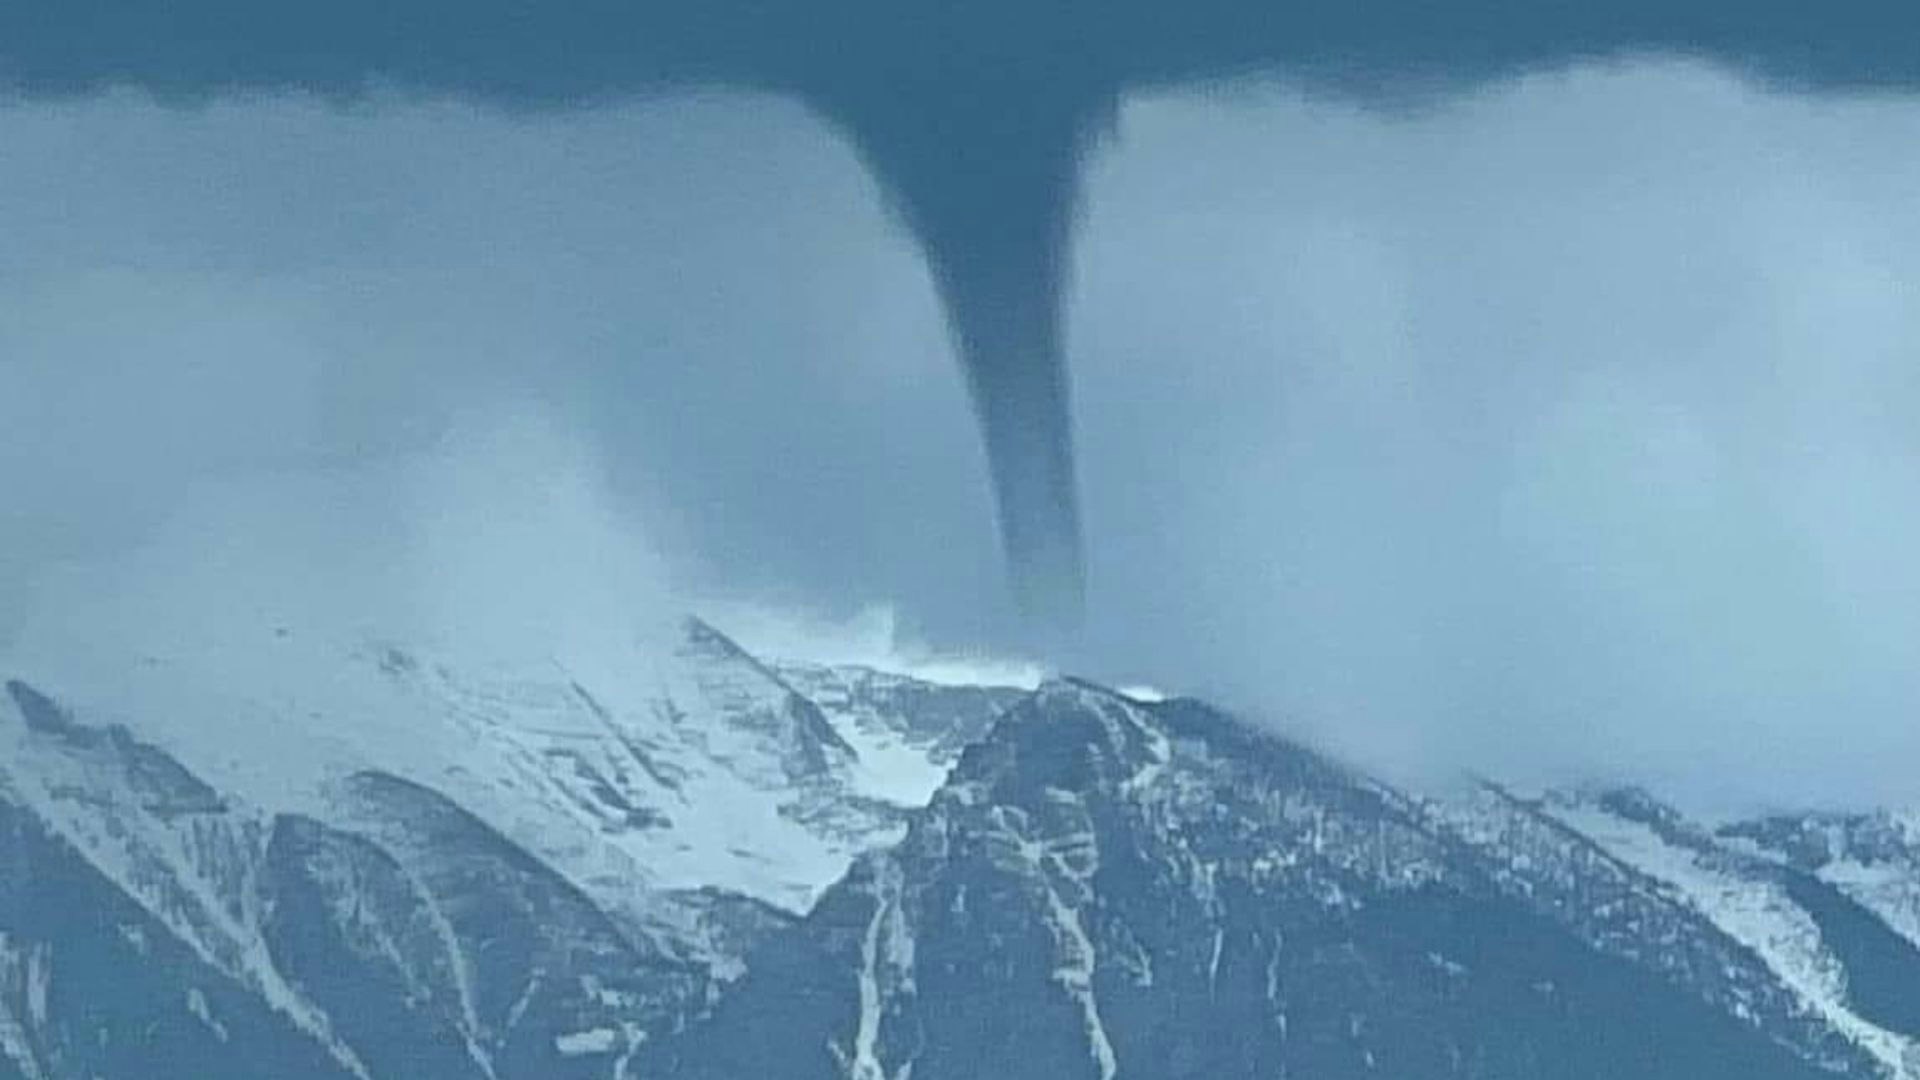 This photo of a land spout over a mountain peak in Montana went viral on social media.